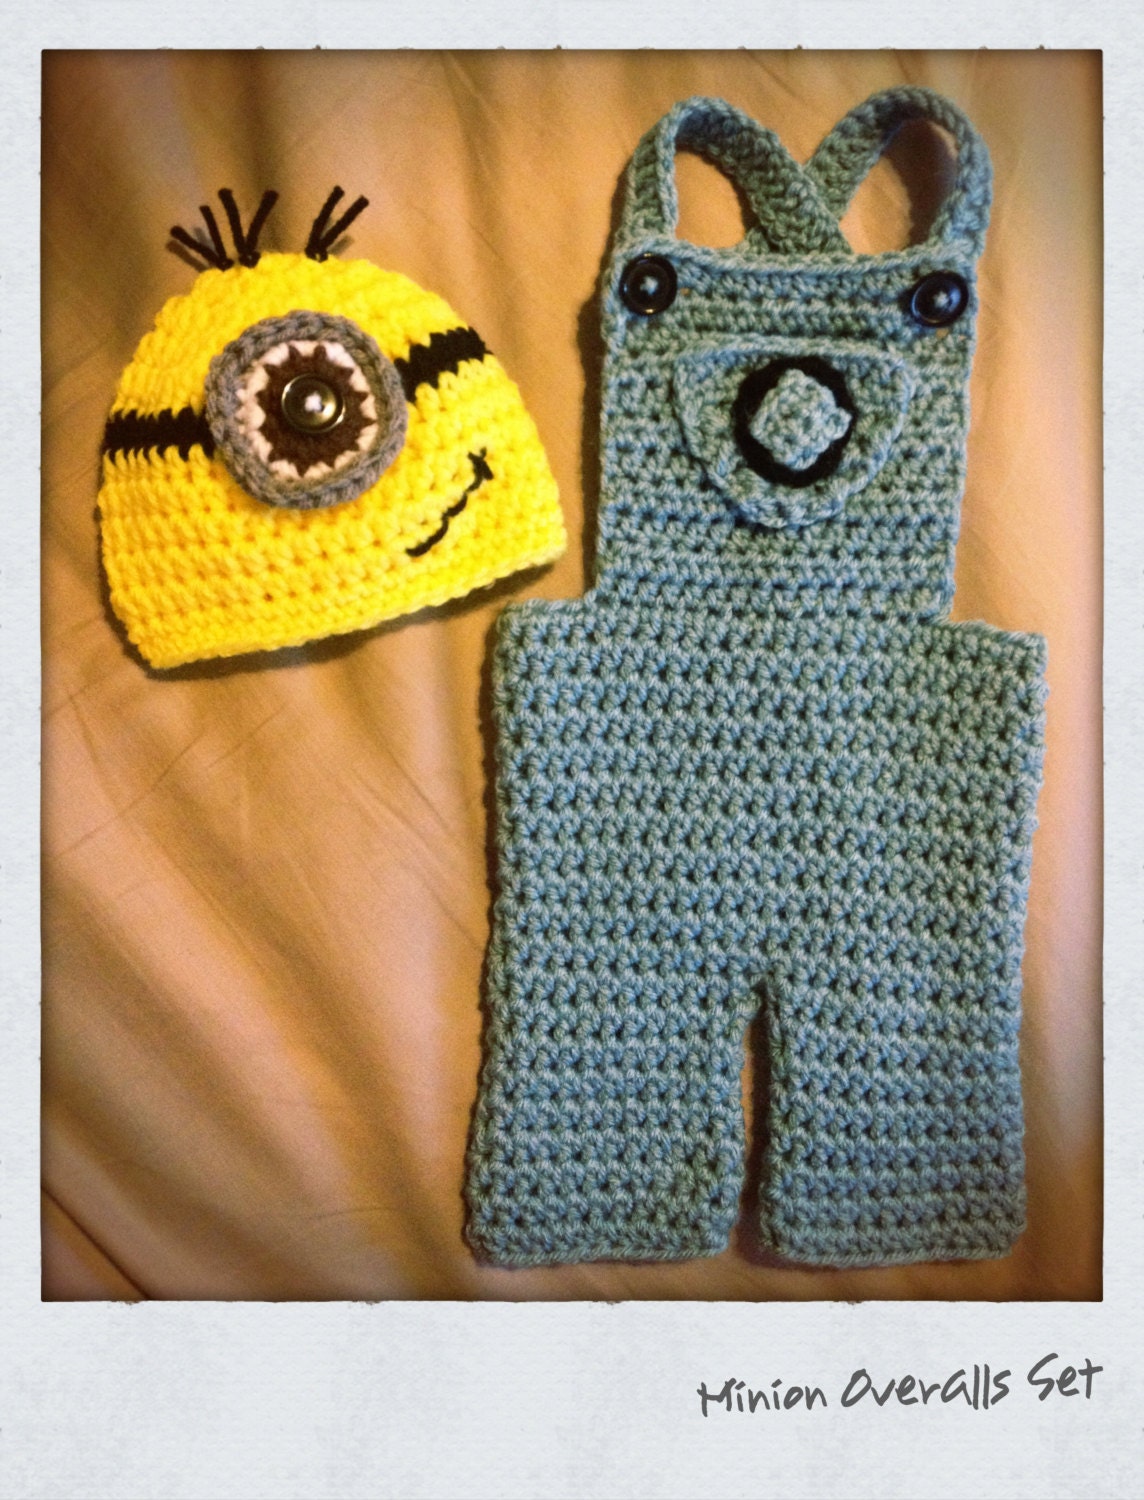 minion-overalls-and-hat-setpattern-onlypdf-instant-download-etsy